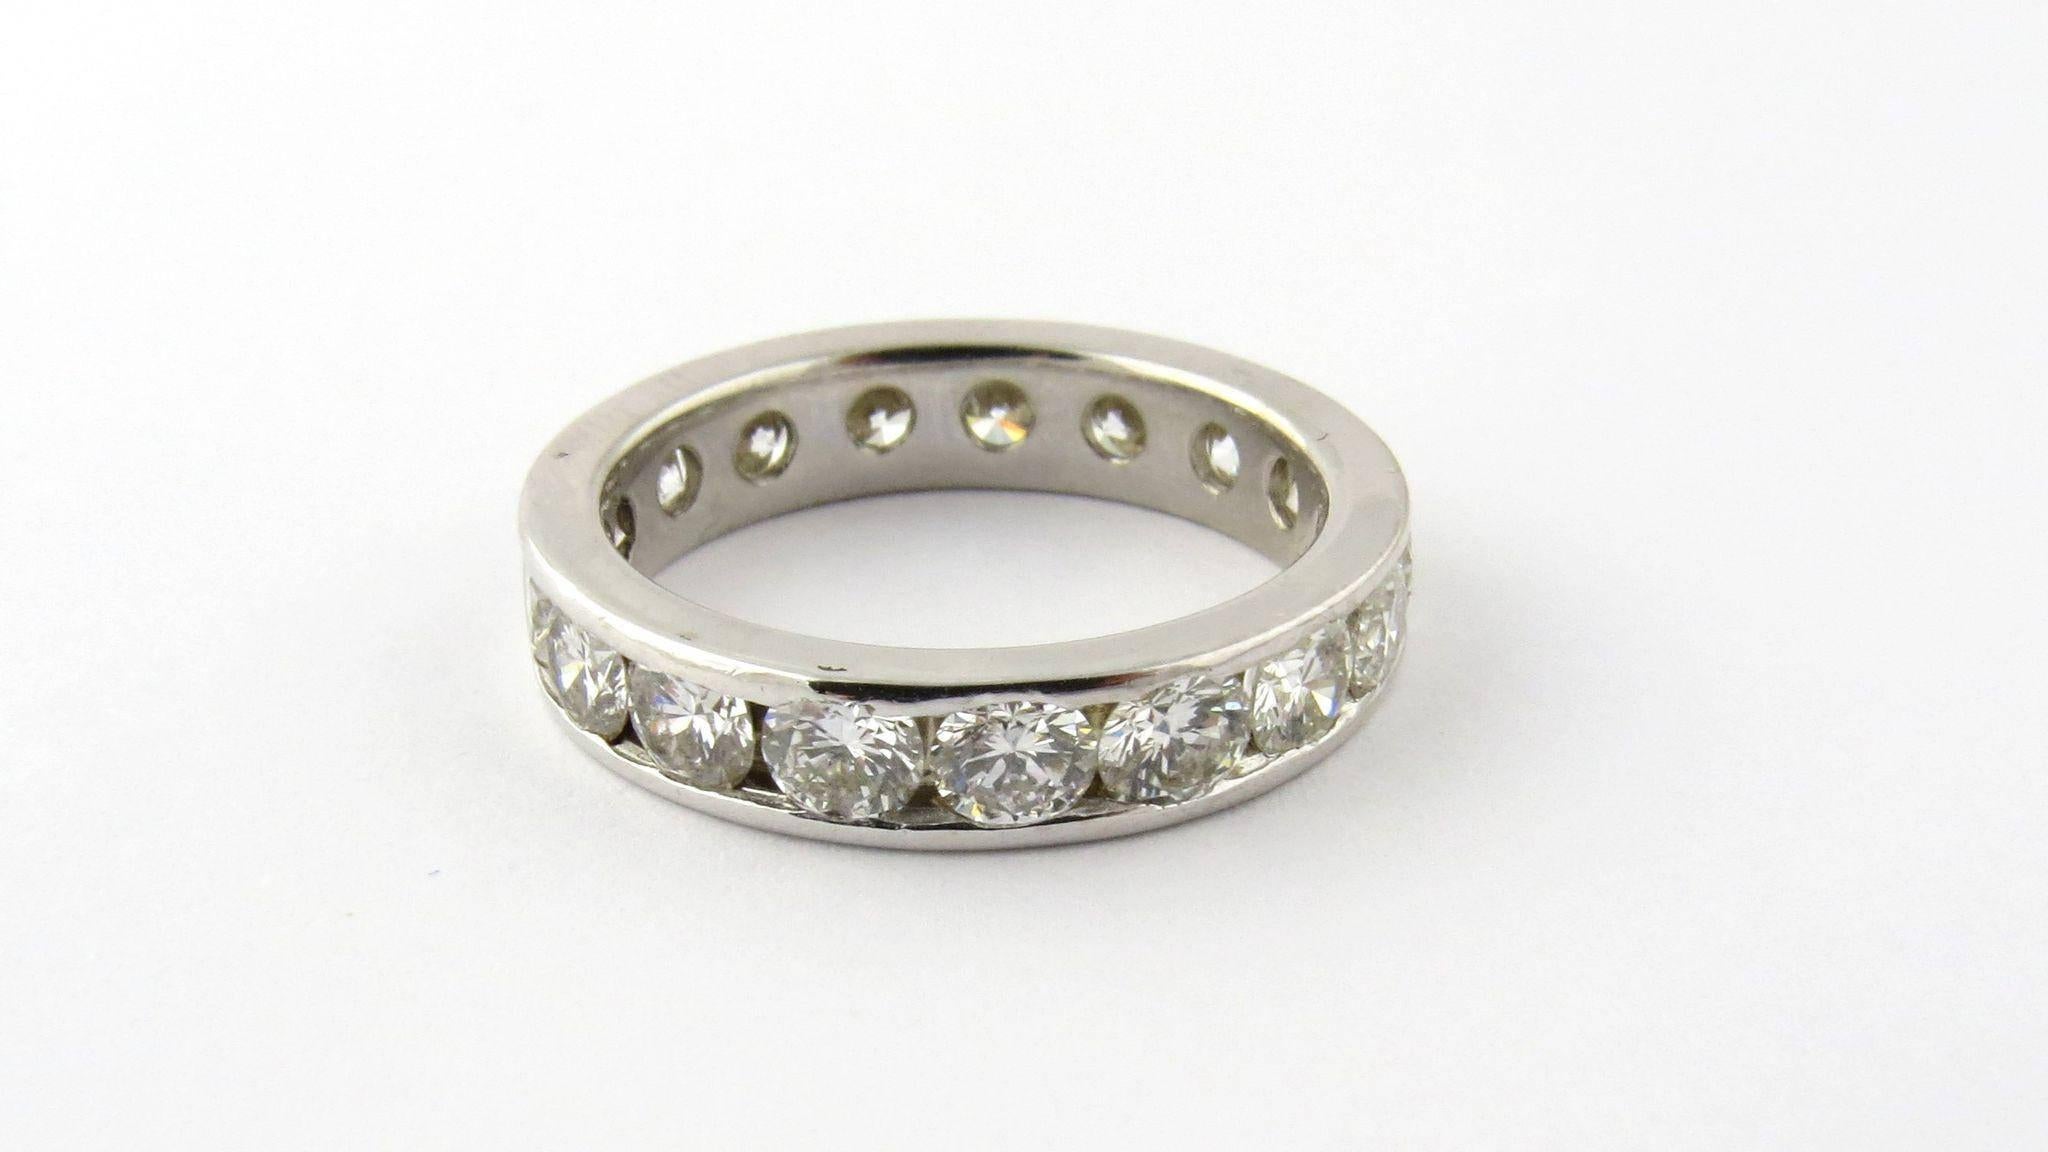 Vintage 14K White Gold Diamond Eternity Band Size 5.5 

This diamond band is channel set with 17 round brilliant diamonds. Each diamond is approximately .13 carats for a total carat weight of approx. 2.21 carats. Diamonds are of SI1 clarity and J